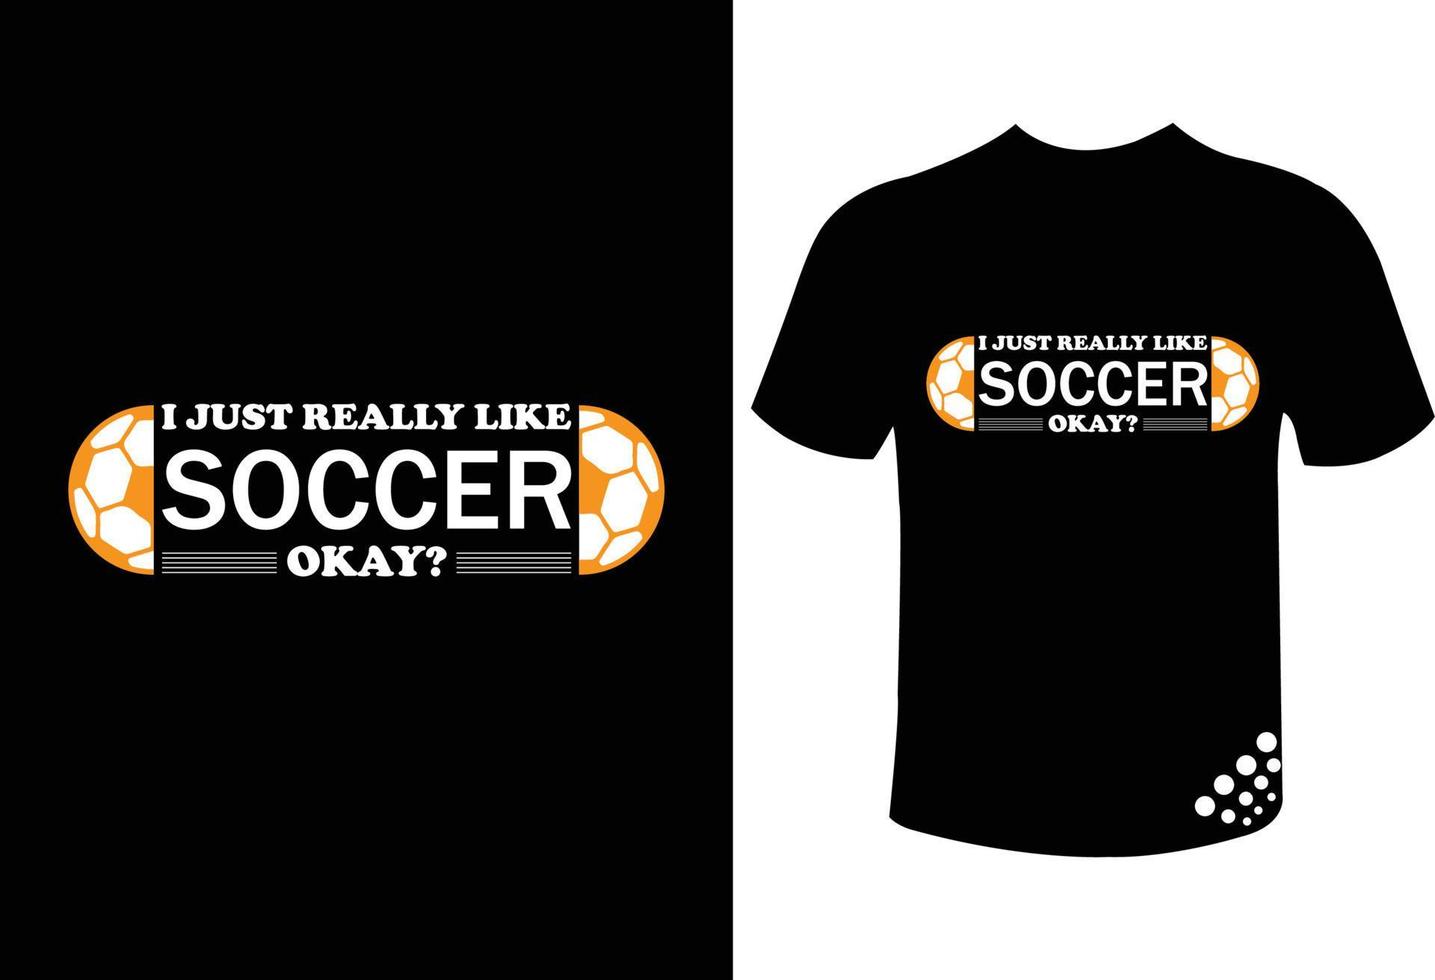 I just really like soccer okay funny football t-shirt design quote vector